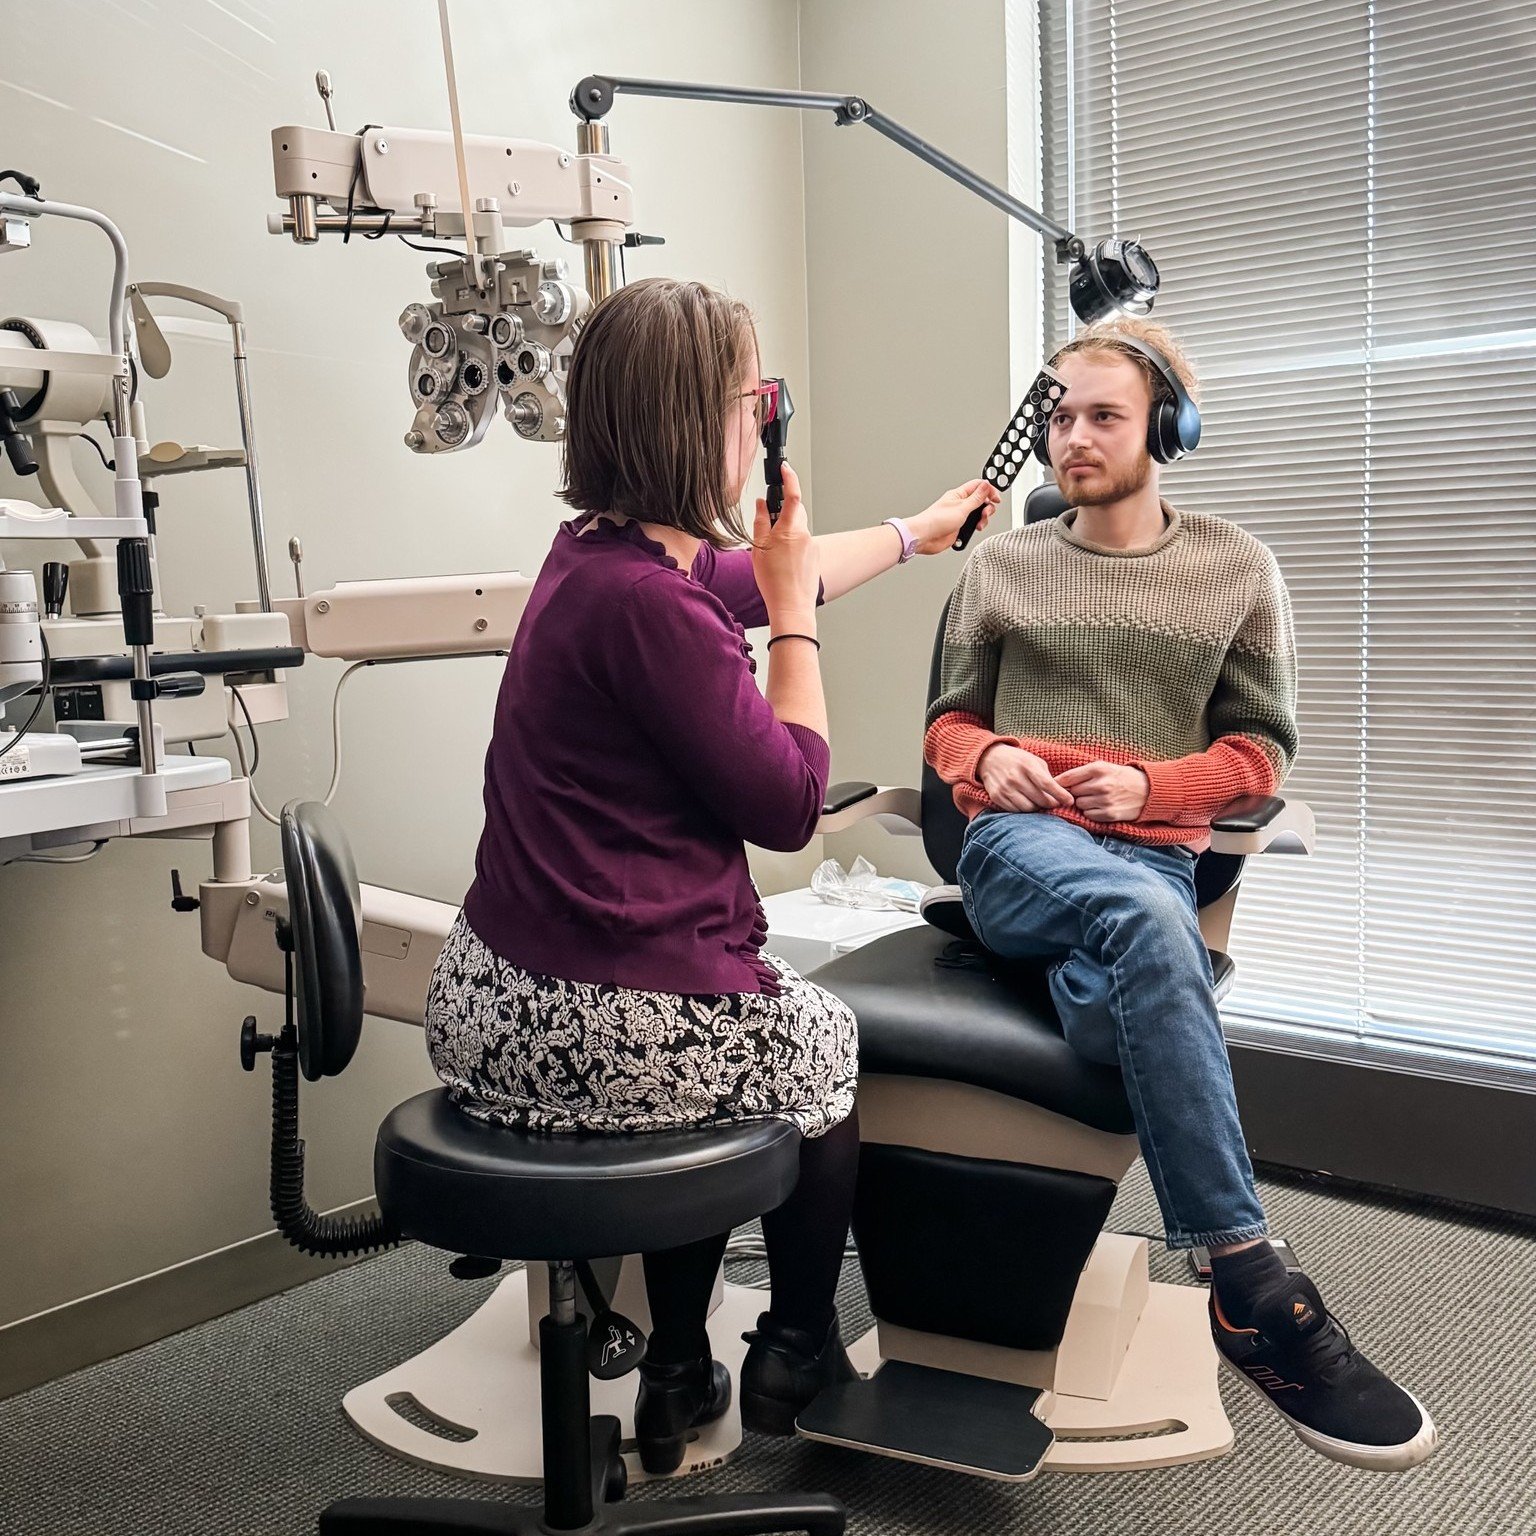 Our co-founder, Mitchell, had his vision tested by Dr. Marsha Sorenson at Vision Rehabilitation Associates this week! We are so appreciative to have found a local optometrist who is able to support our non-speaking clients. She has also provided wond